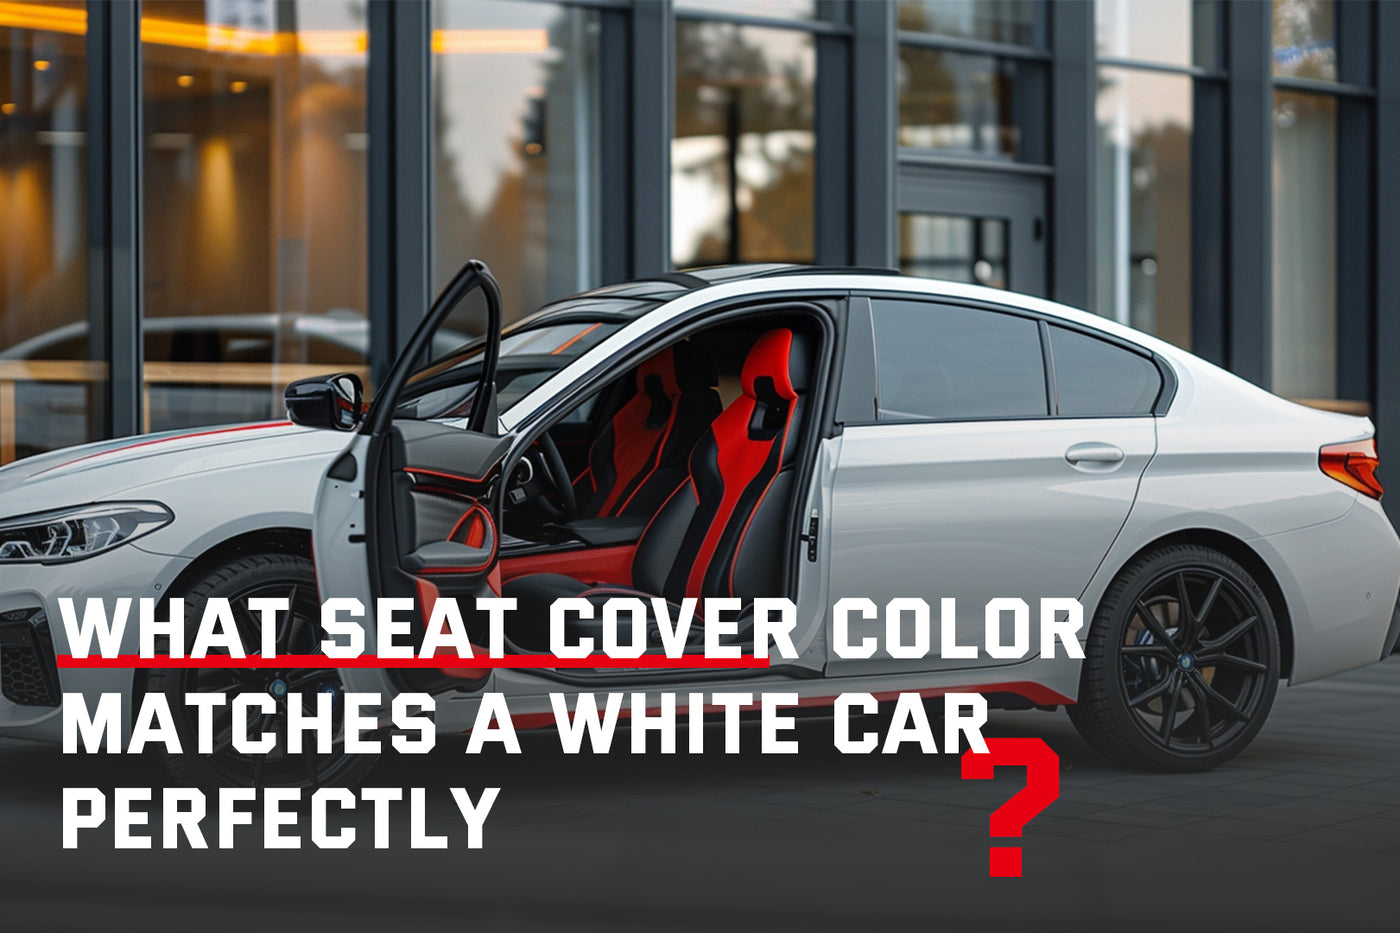 Which Color Seat Cover is Best for White Car?